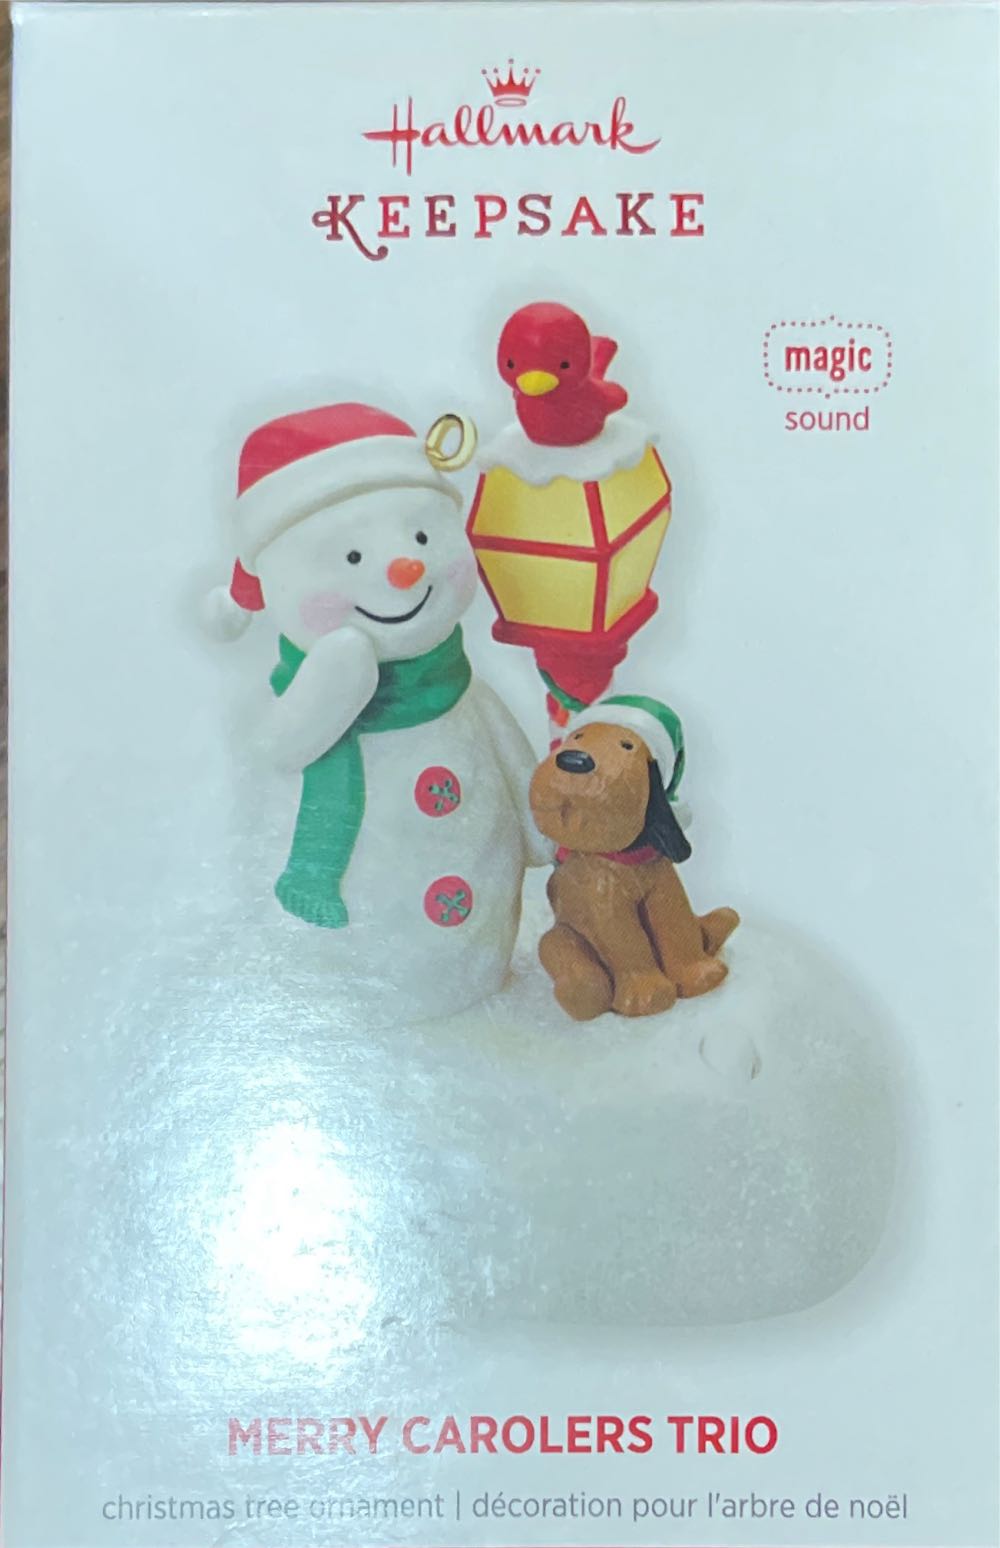 Merry Carolers Trio - Jingle Pals (Snowman) ornament collectible [Barcode 795902358068] - Main Image 1